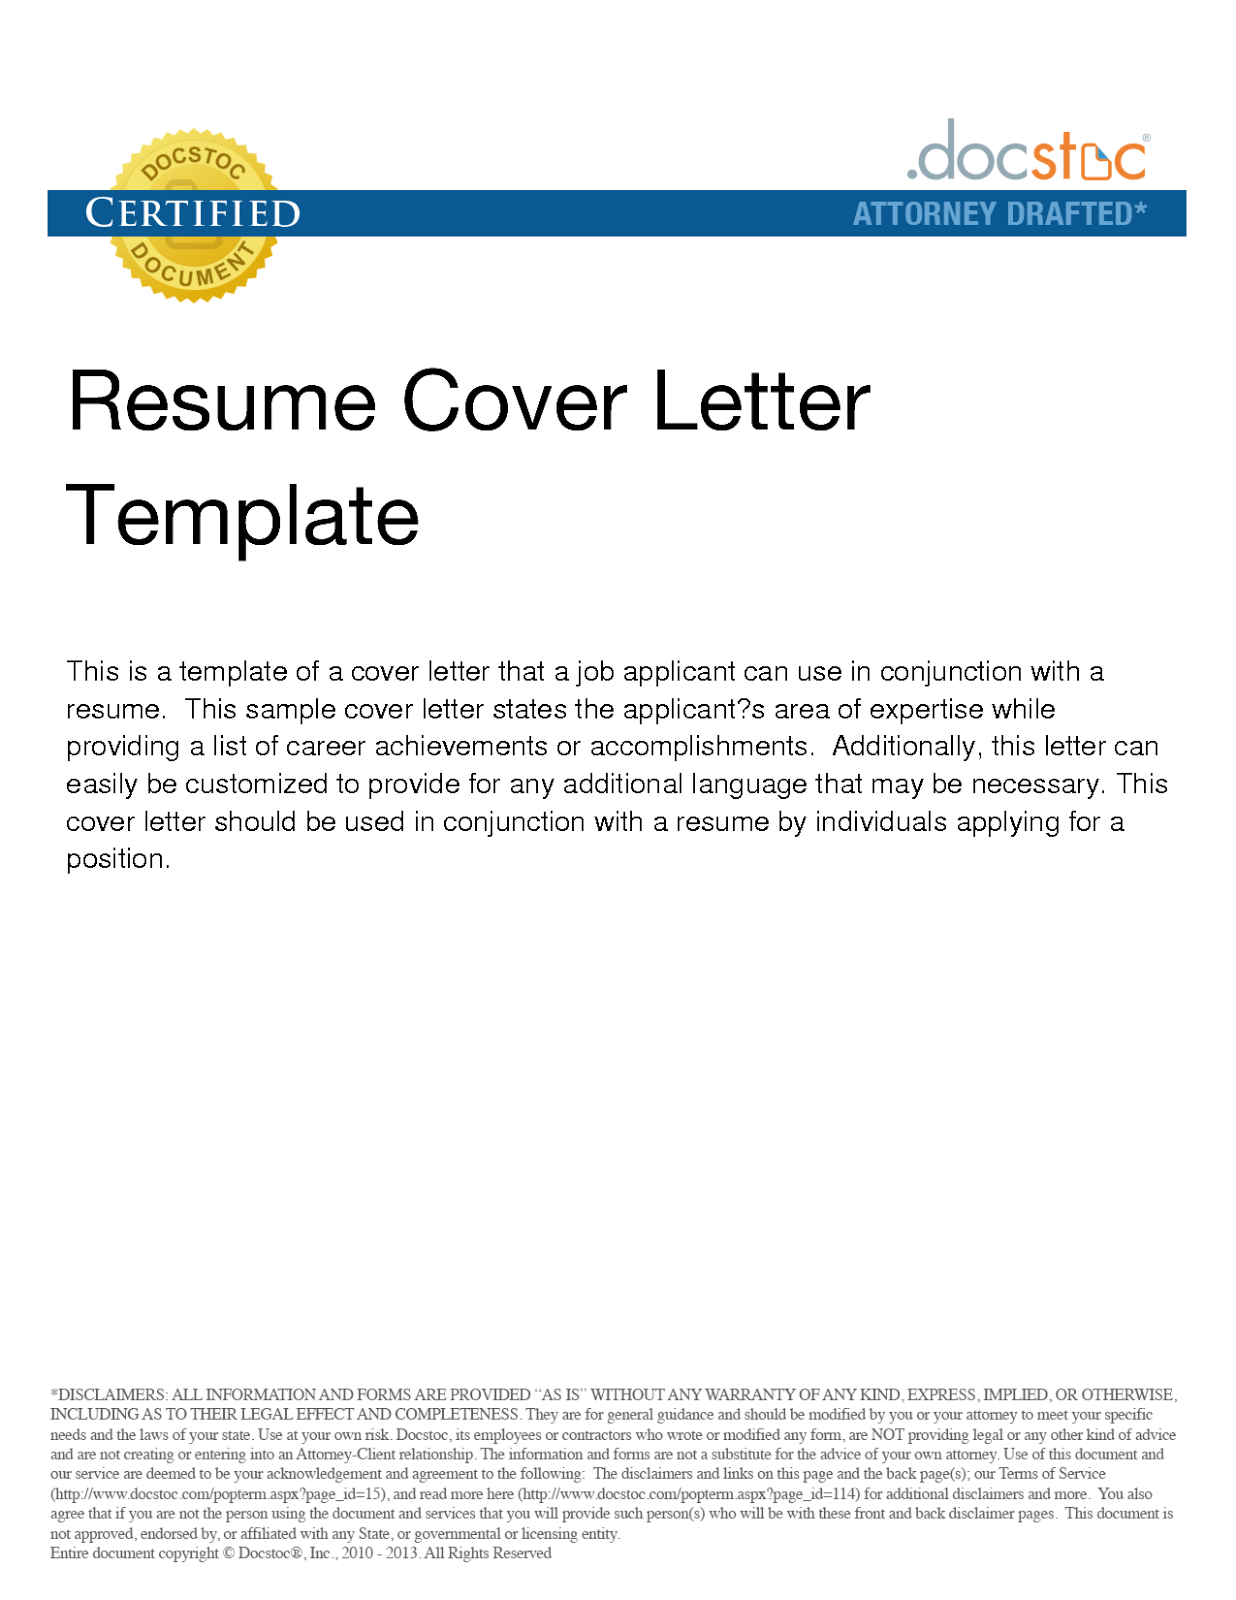 template of a cover page for resume, resume cover page template word, resume cover sheet template, how do you write a cover letter for a resume, free-sampleresumes.blogspot.com